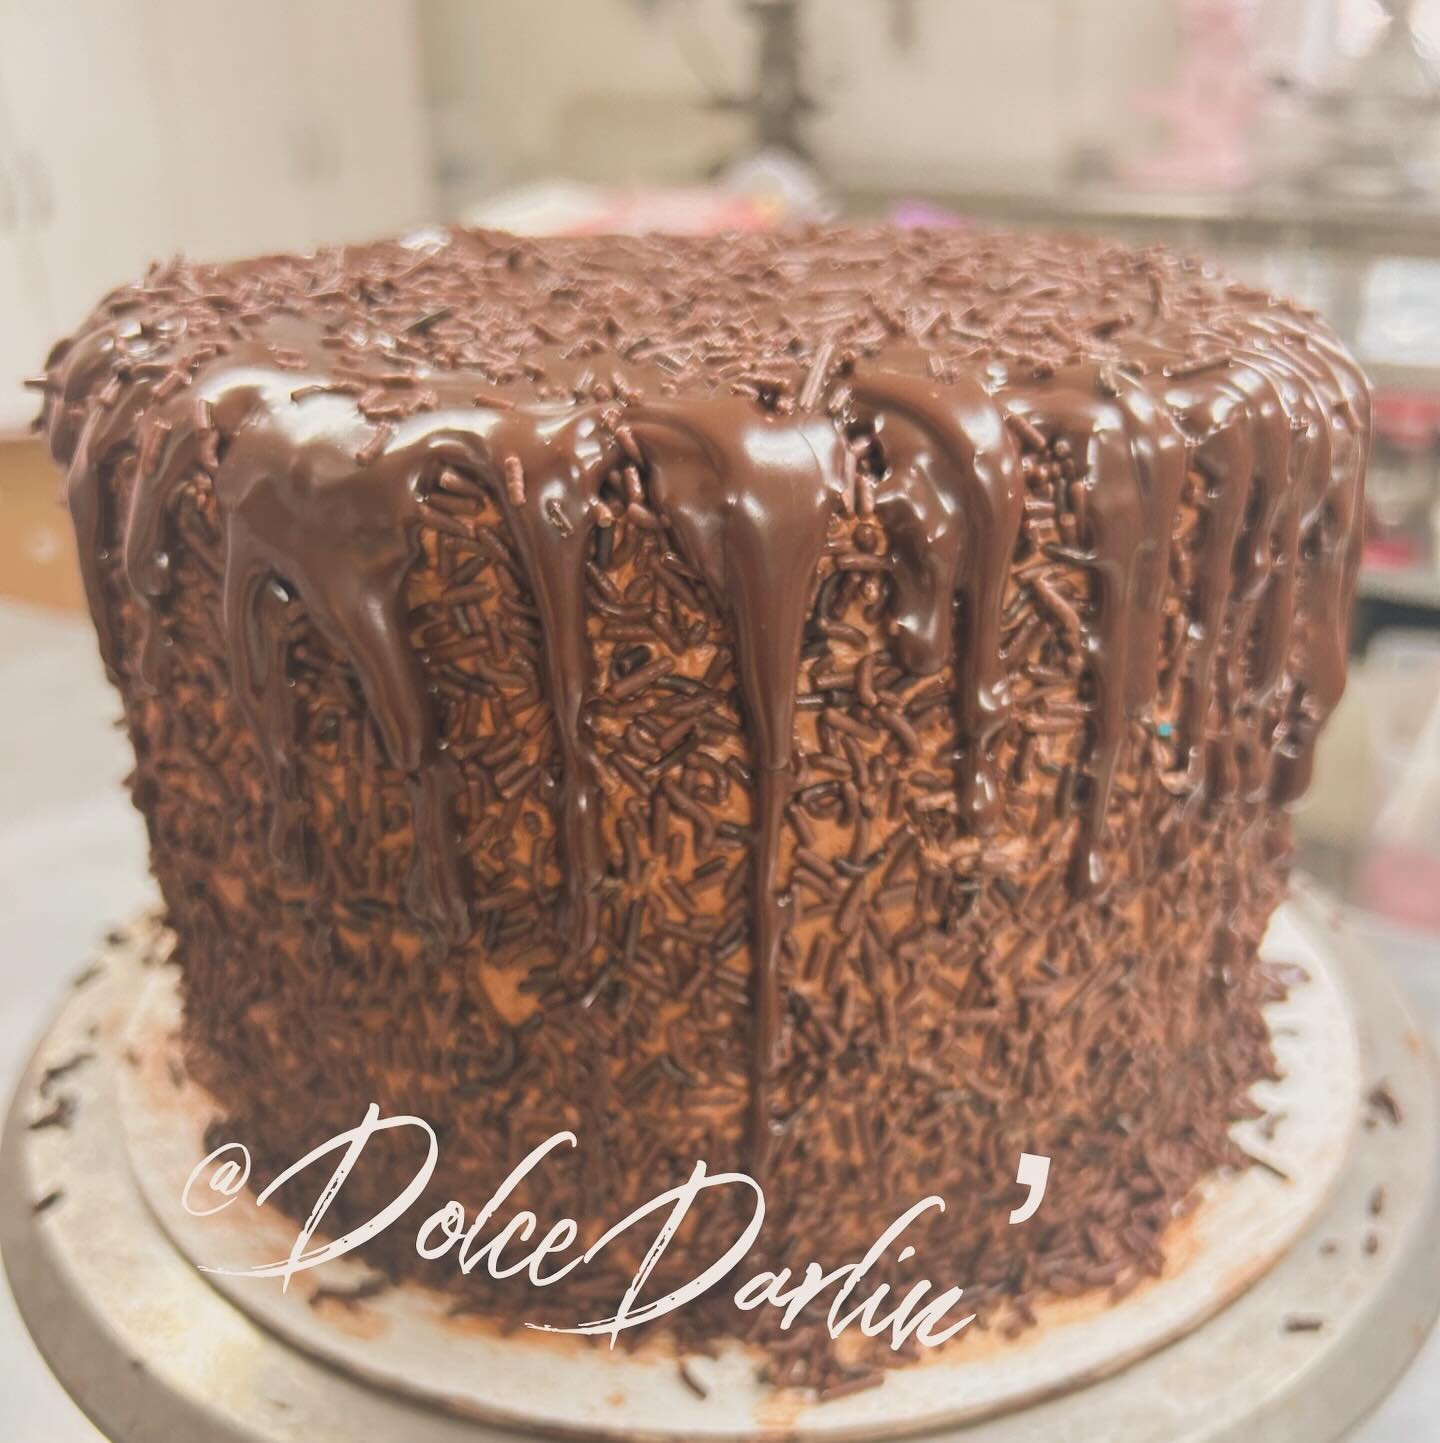 Good morning, Darlin&rsquo;! I just wanted you to see this cake this morning. I can barely make myself cut into it! 😍 But if I don&rsquo;t, y&rsquo;all don&rsquo;t have cake slices and then I&rsquo;m left to eat this entire gigantic cake! 😂 So off 